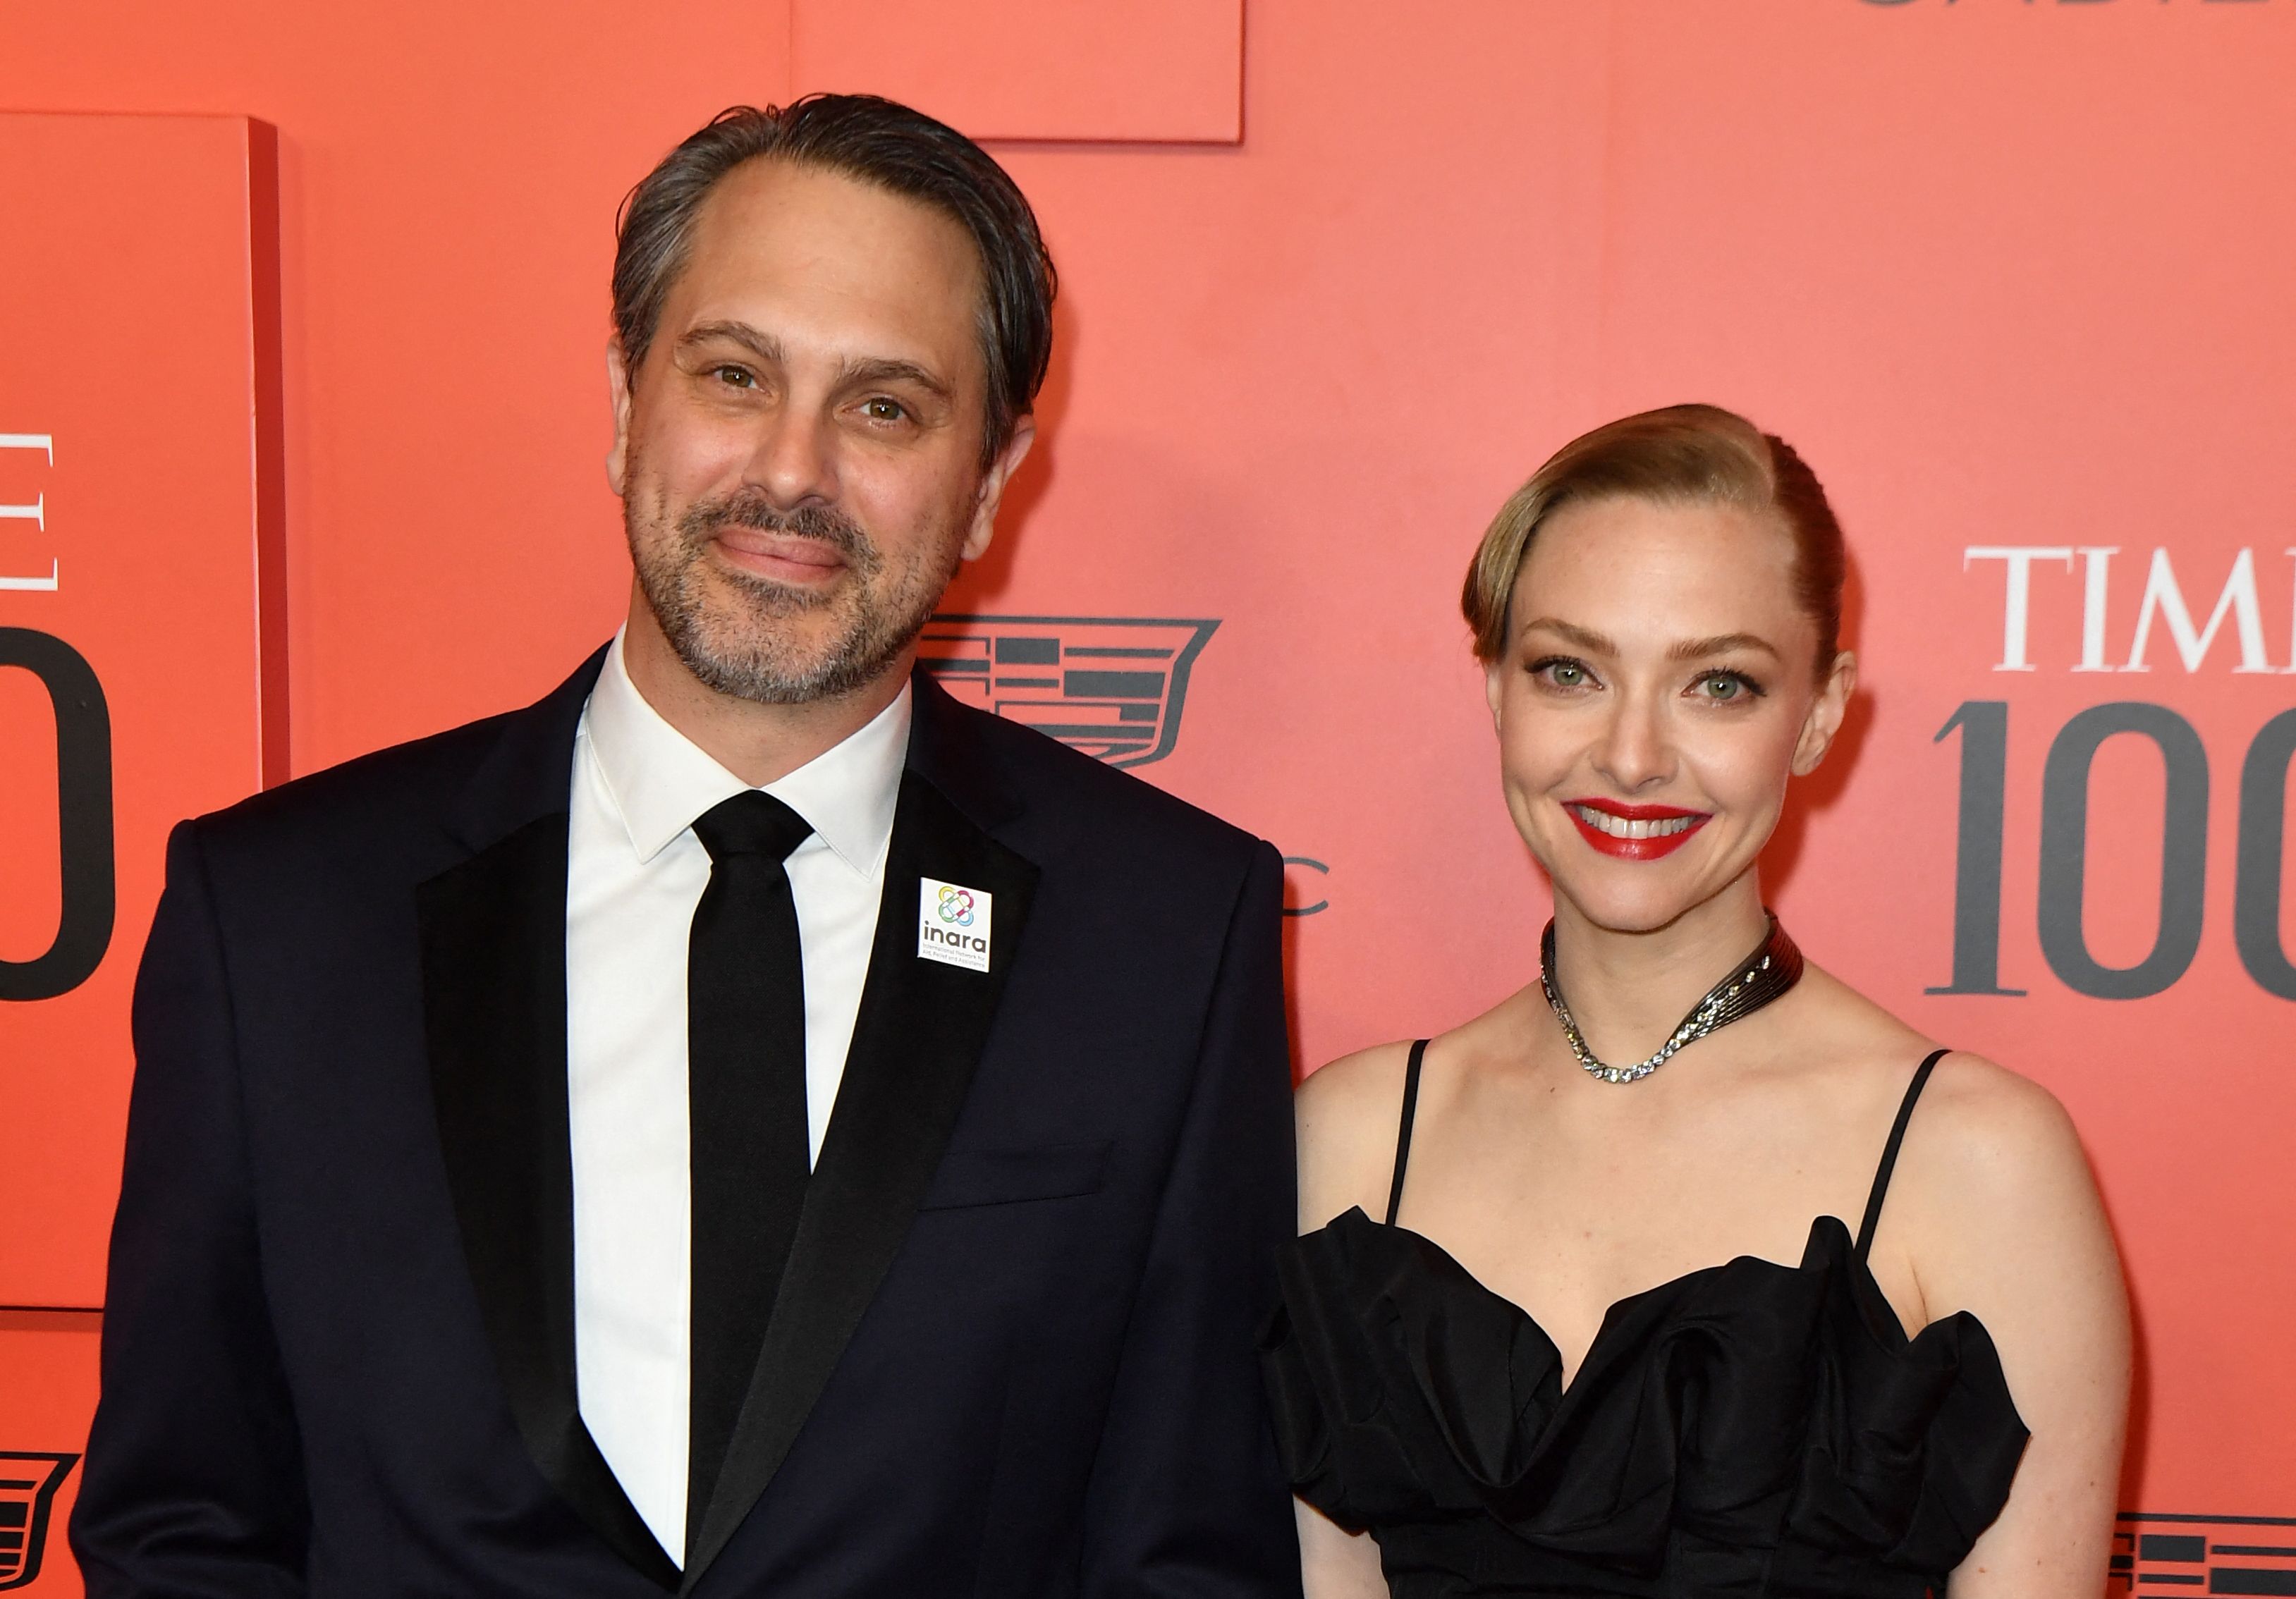 Amanda Seyfried and her husband Thomas Sadoski attends the Time 100 Gala in New York